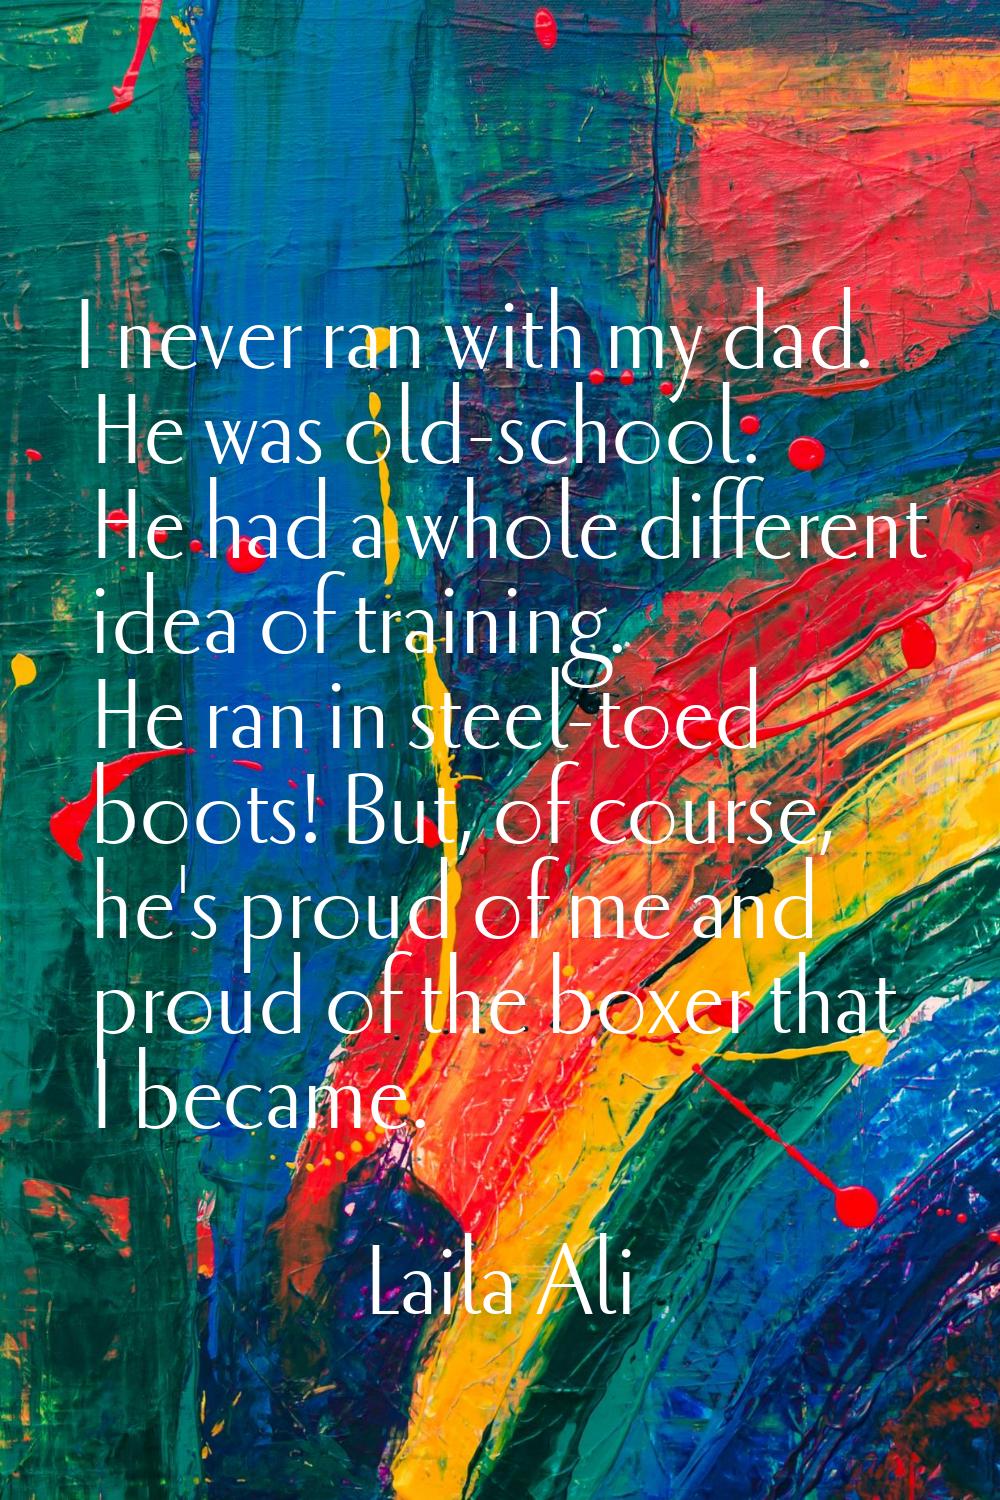 I never ran with my dad. He was old-school. He had a whole different idea of training. He ran in st